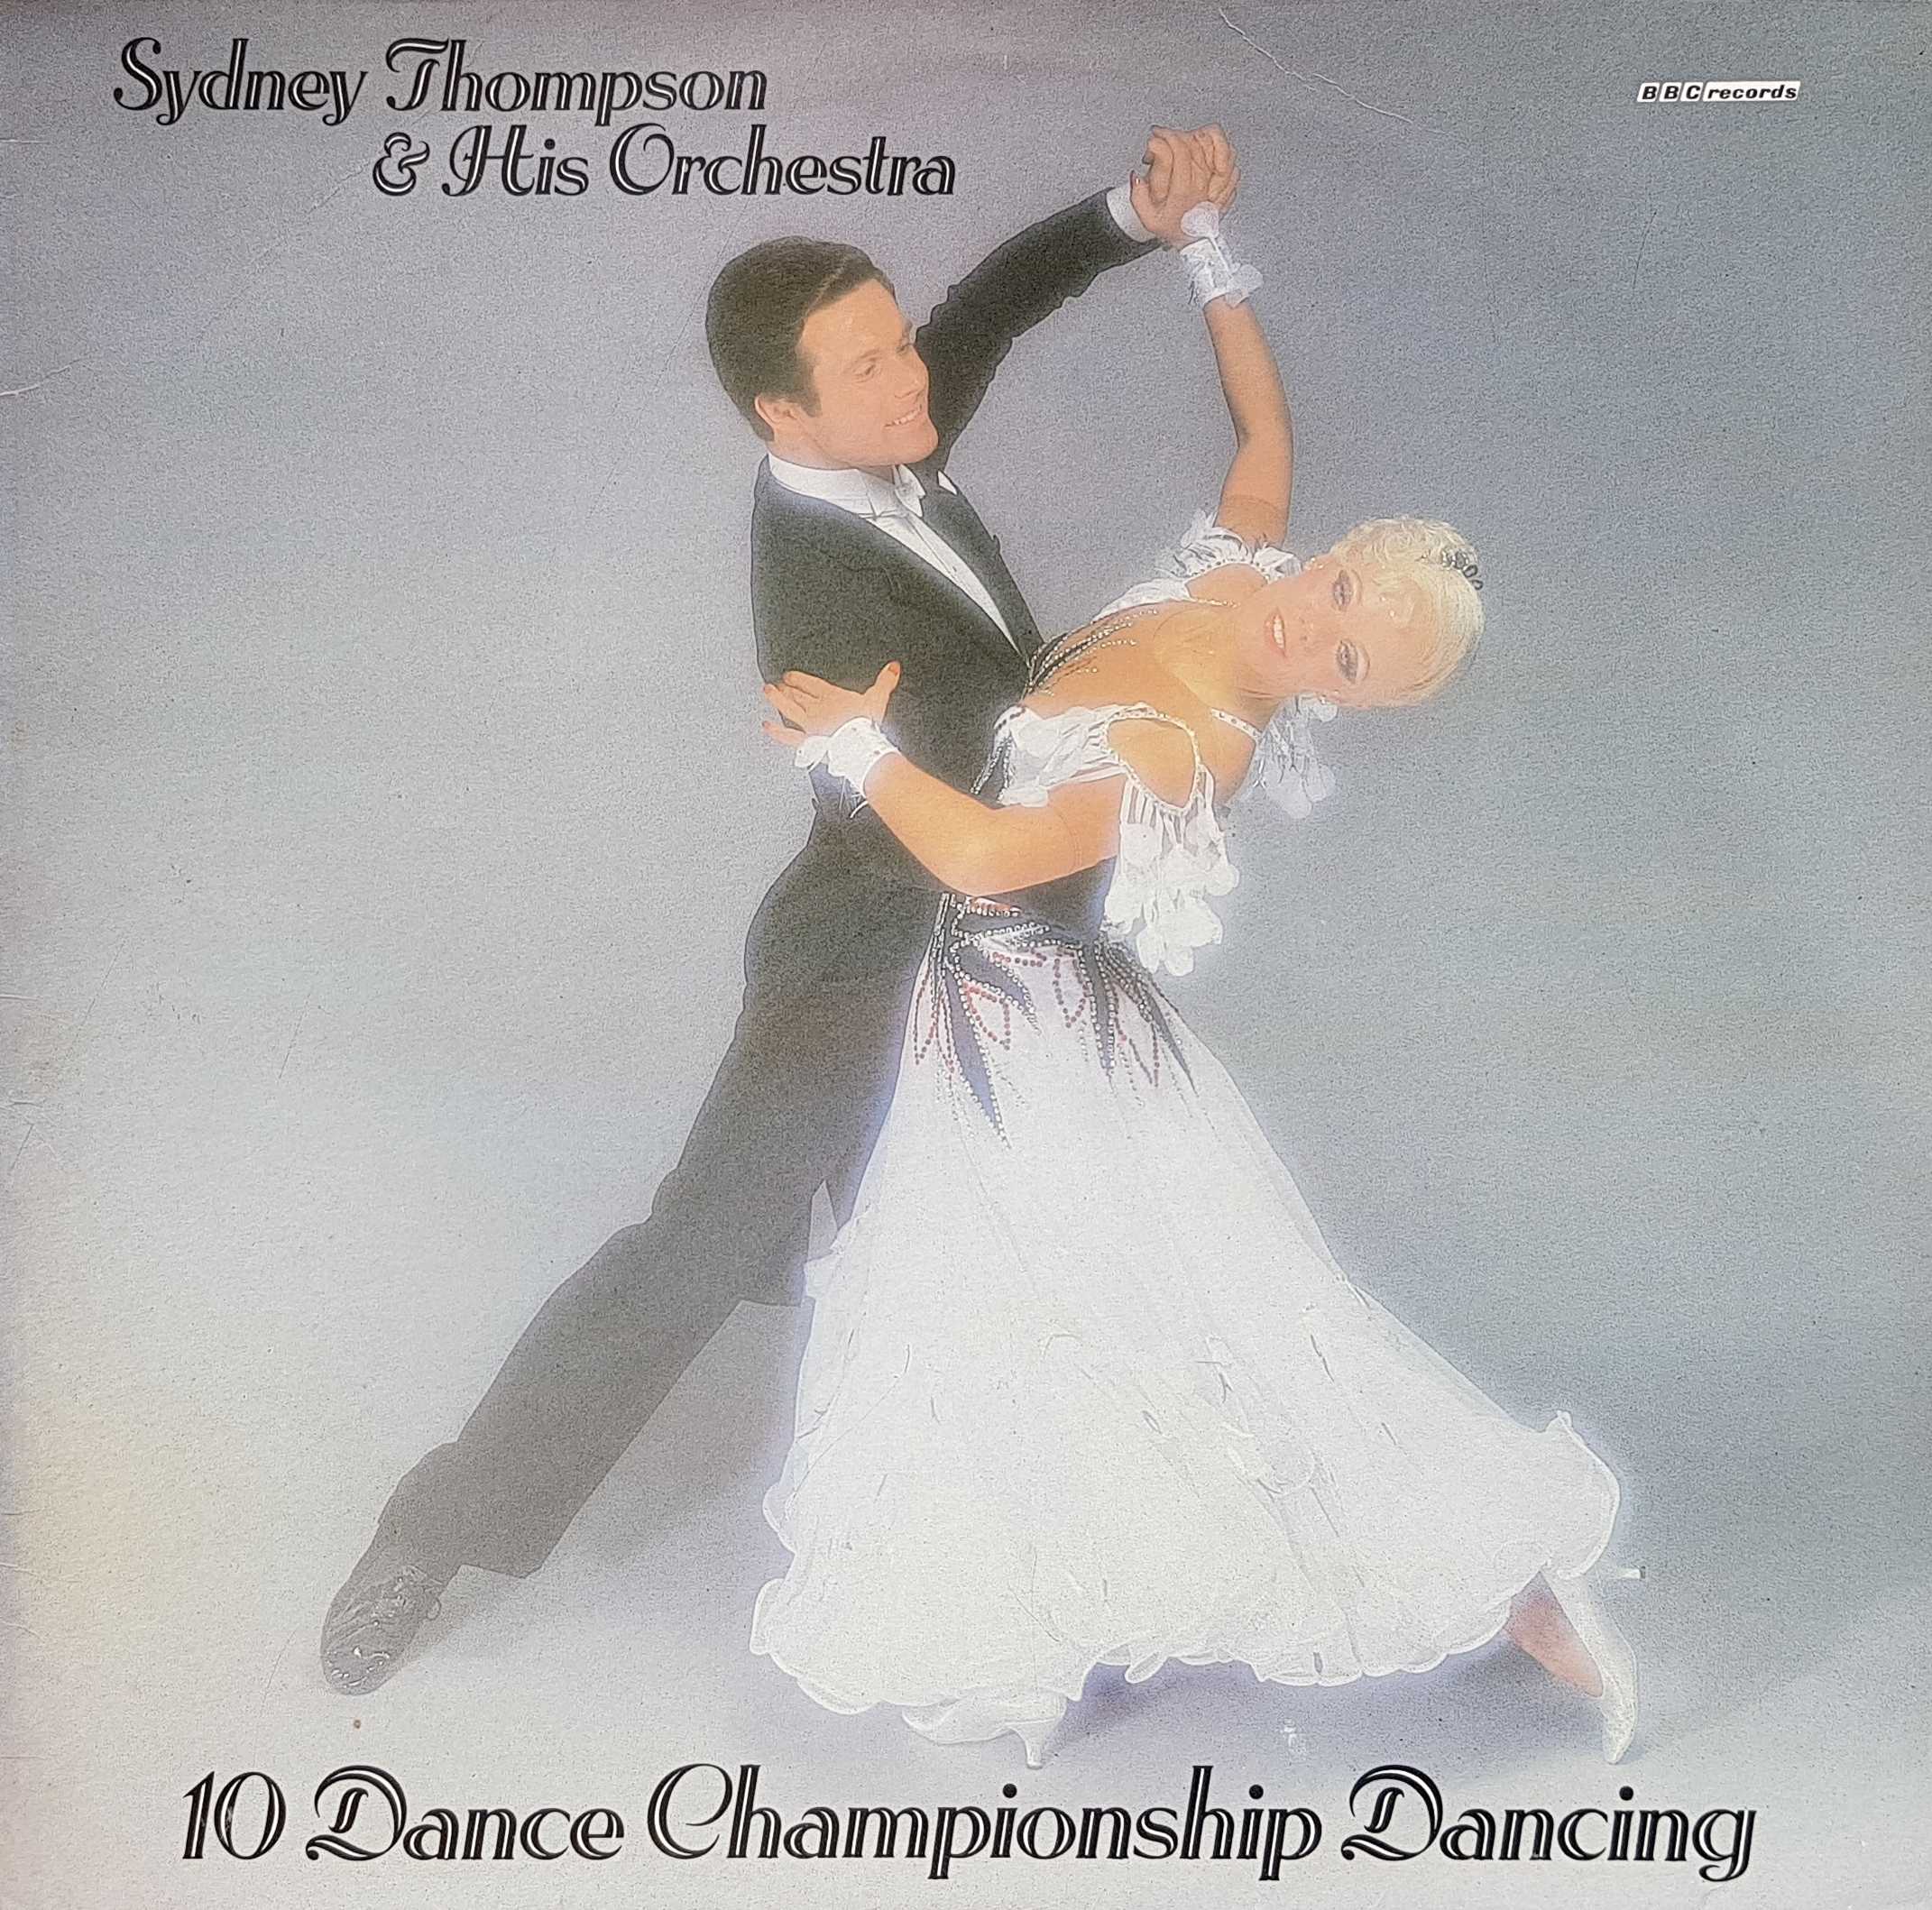 Picture of REH 509 Sydney Thompson - 10 dance championship dancing by artist Various / Sydney Thompson and his orchestra from the BBC albums - Records and Tapes library